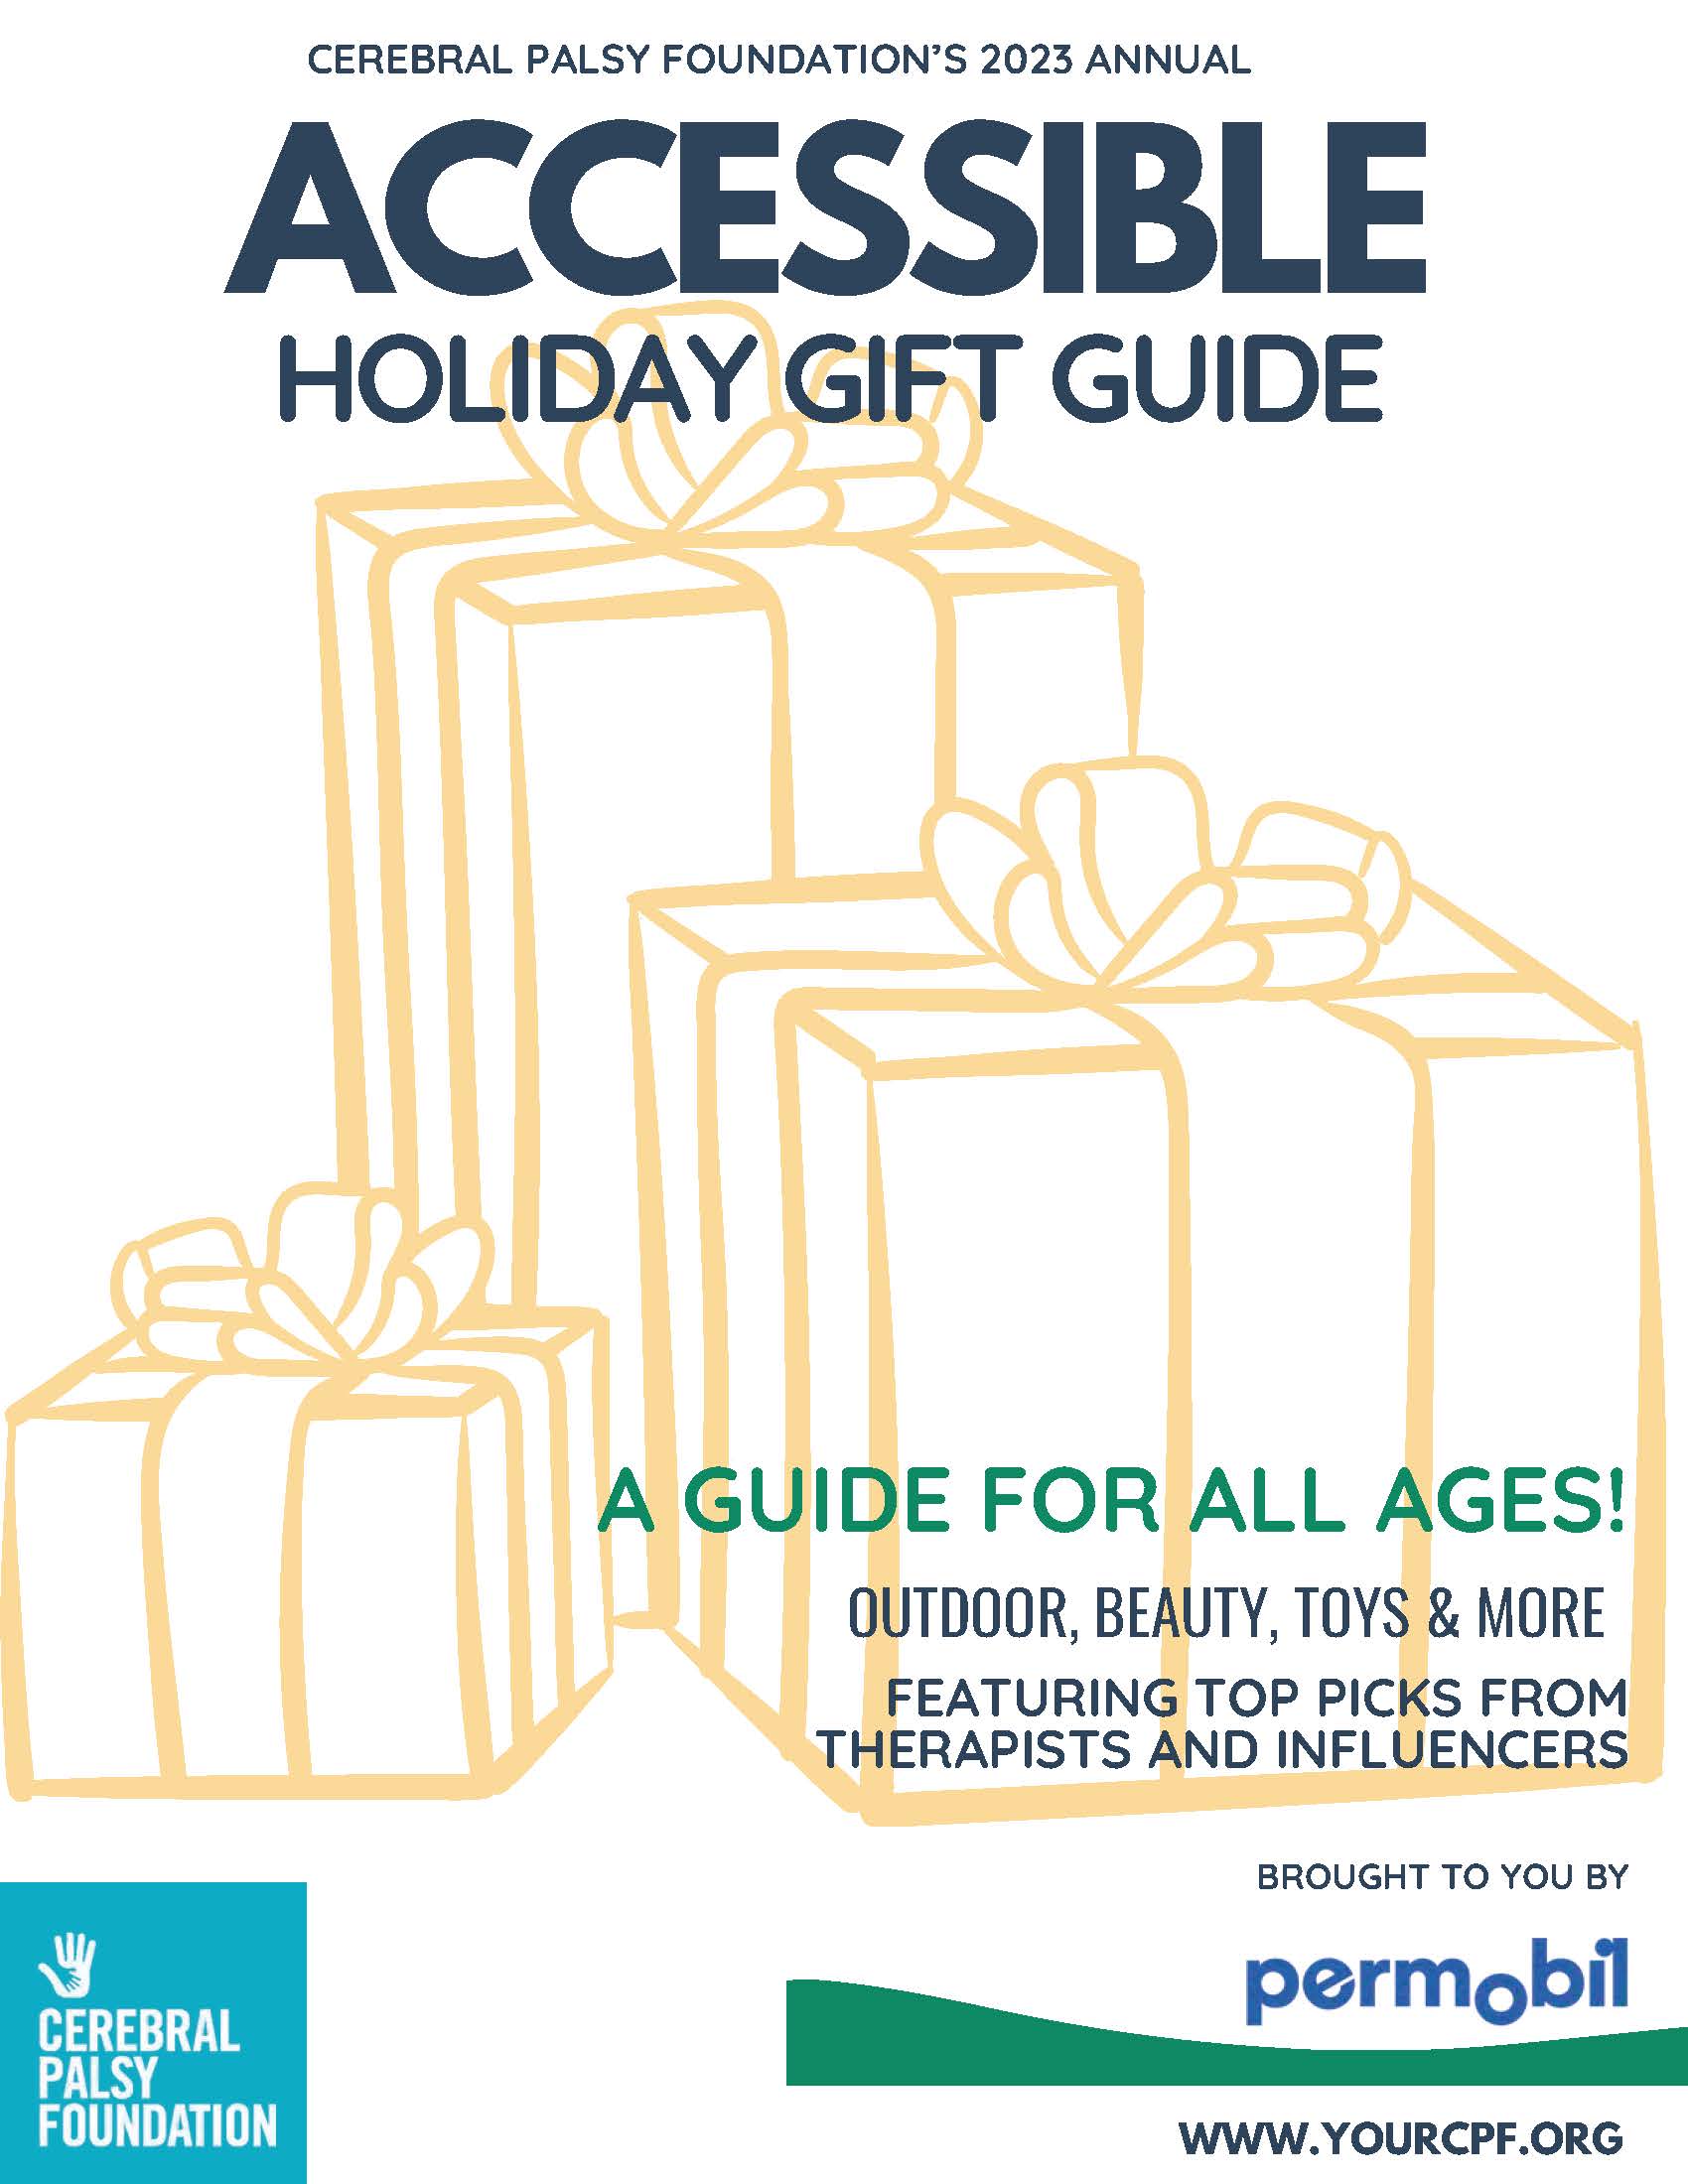 Permobil presents the 2023 CPF accessible holiday gift guide